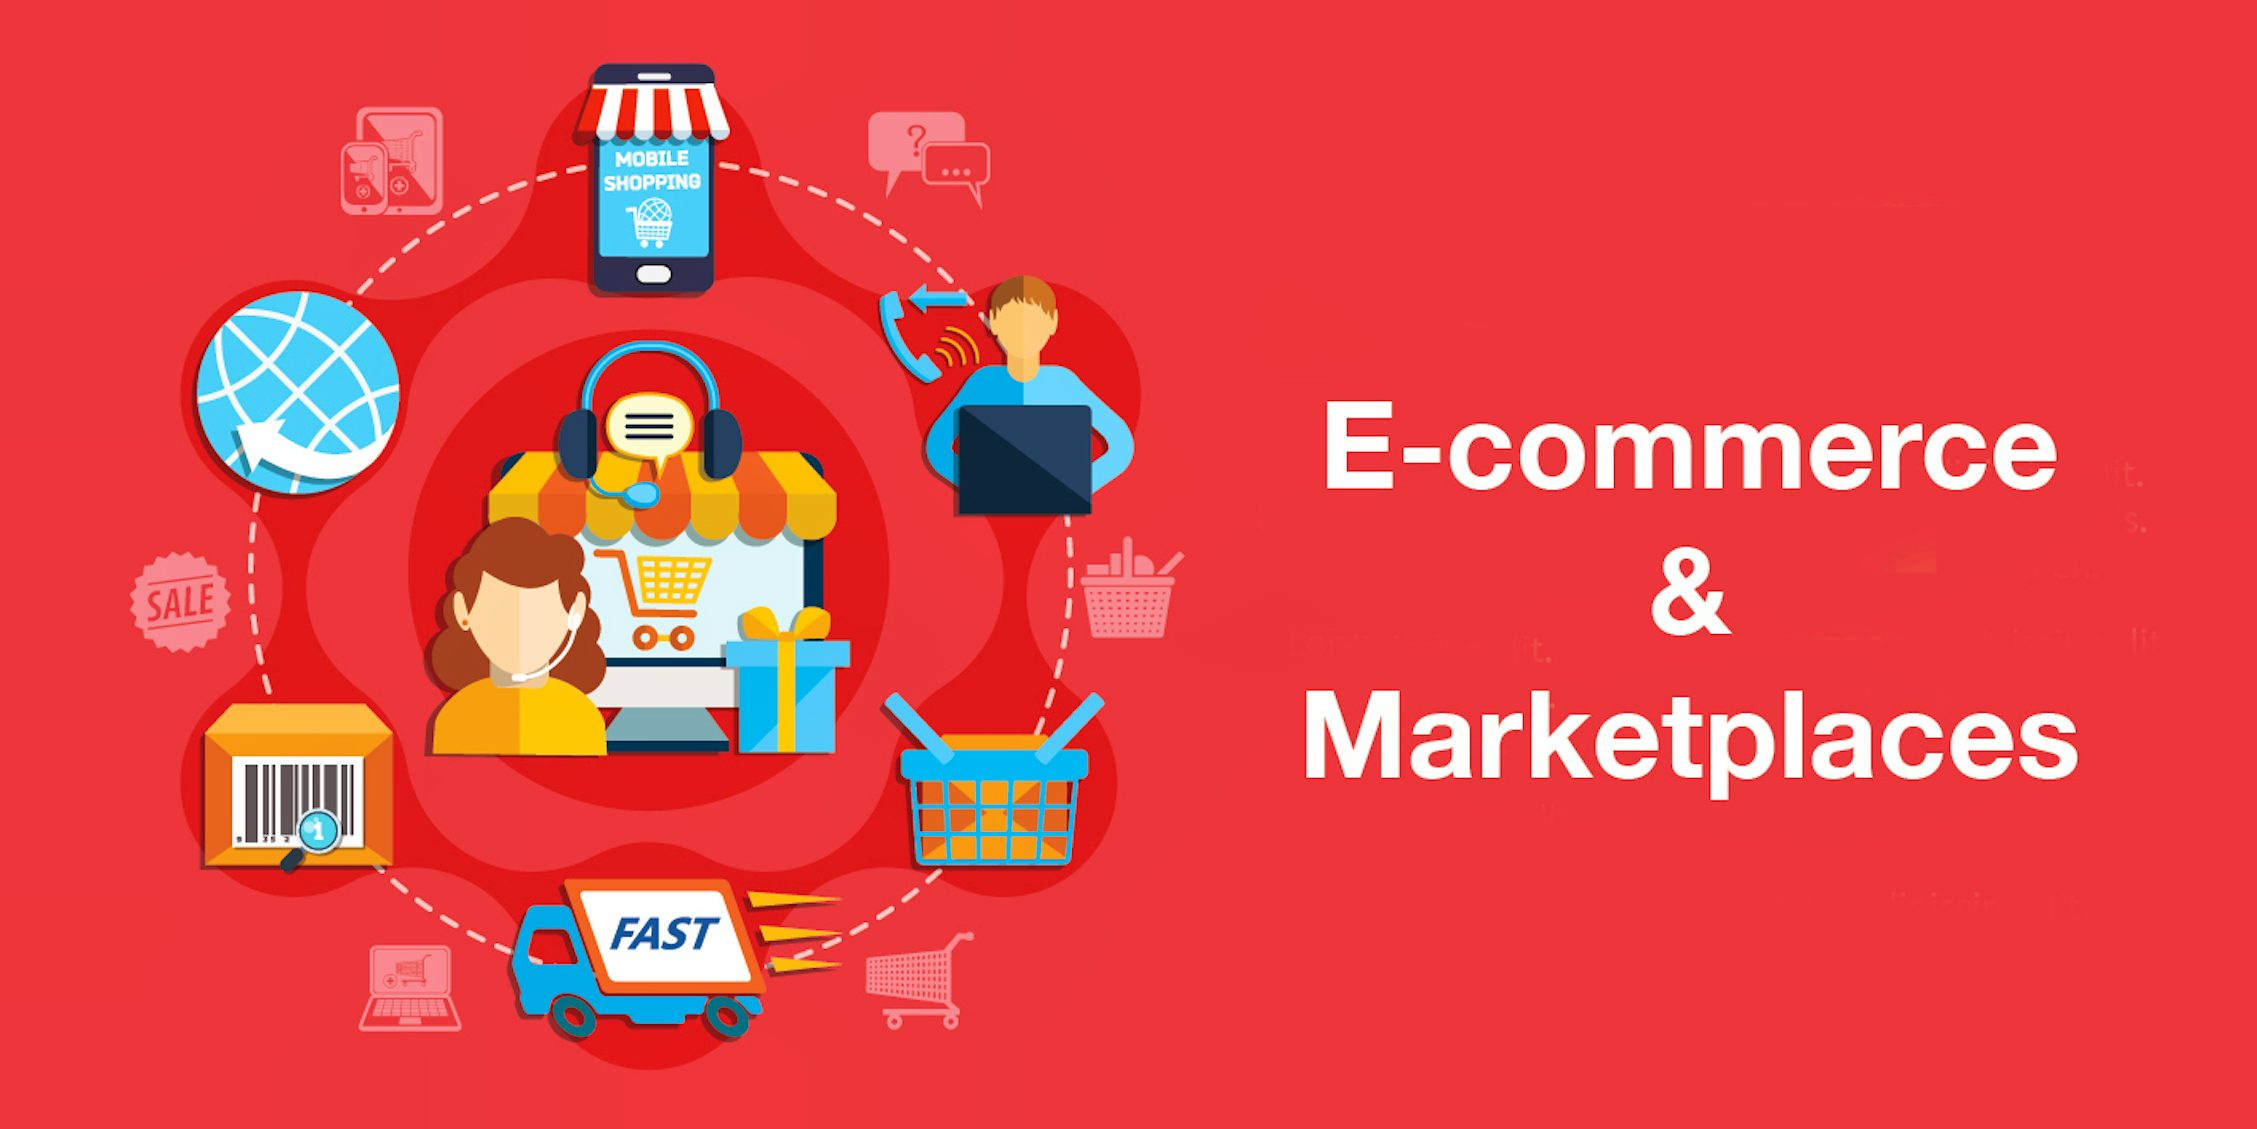 explain case study for analysis of e commerce strategies for retail businesses